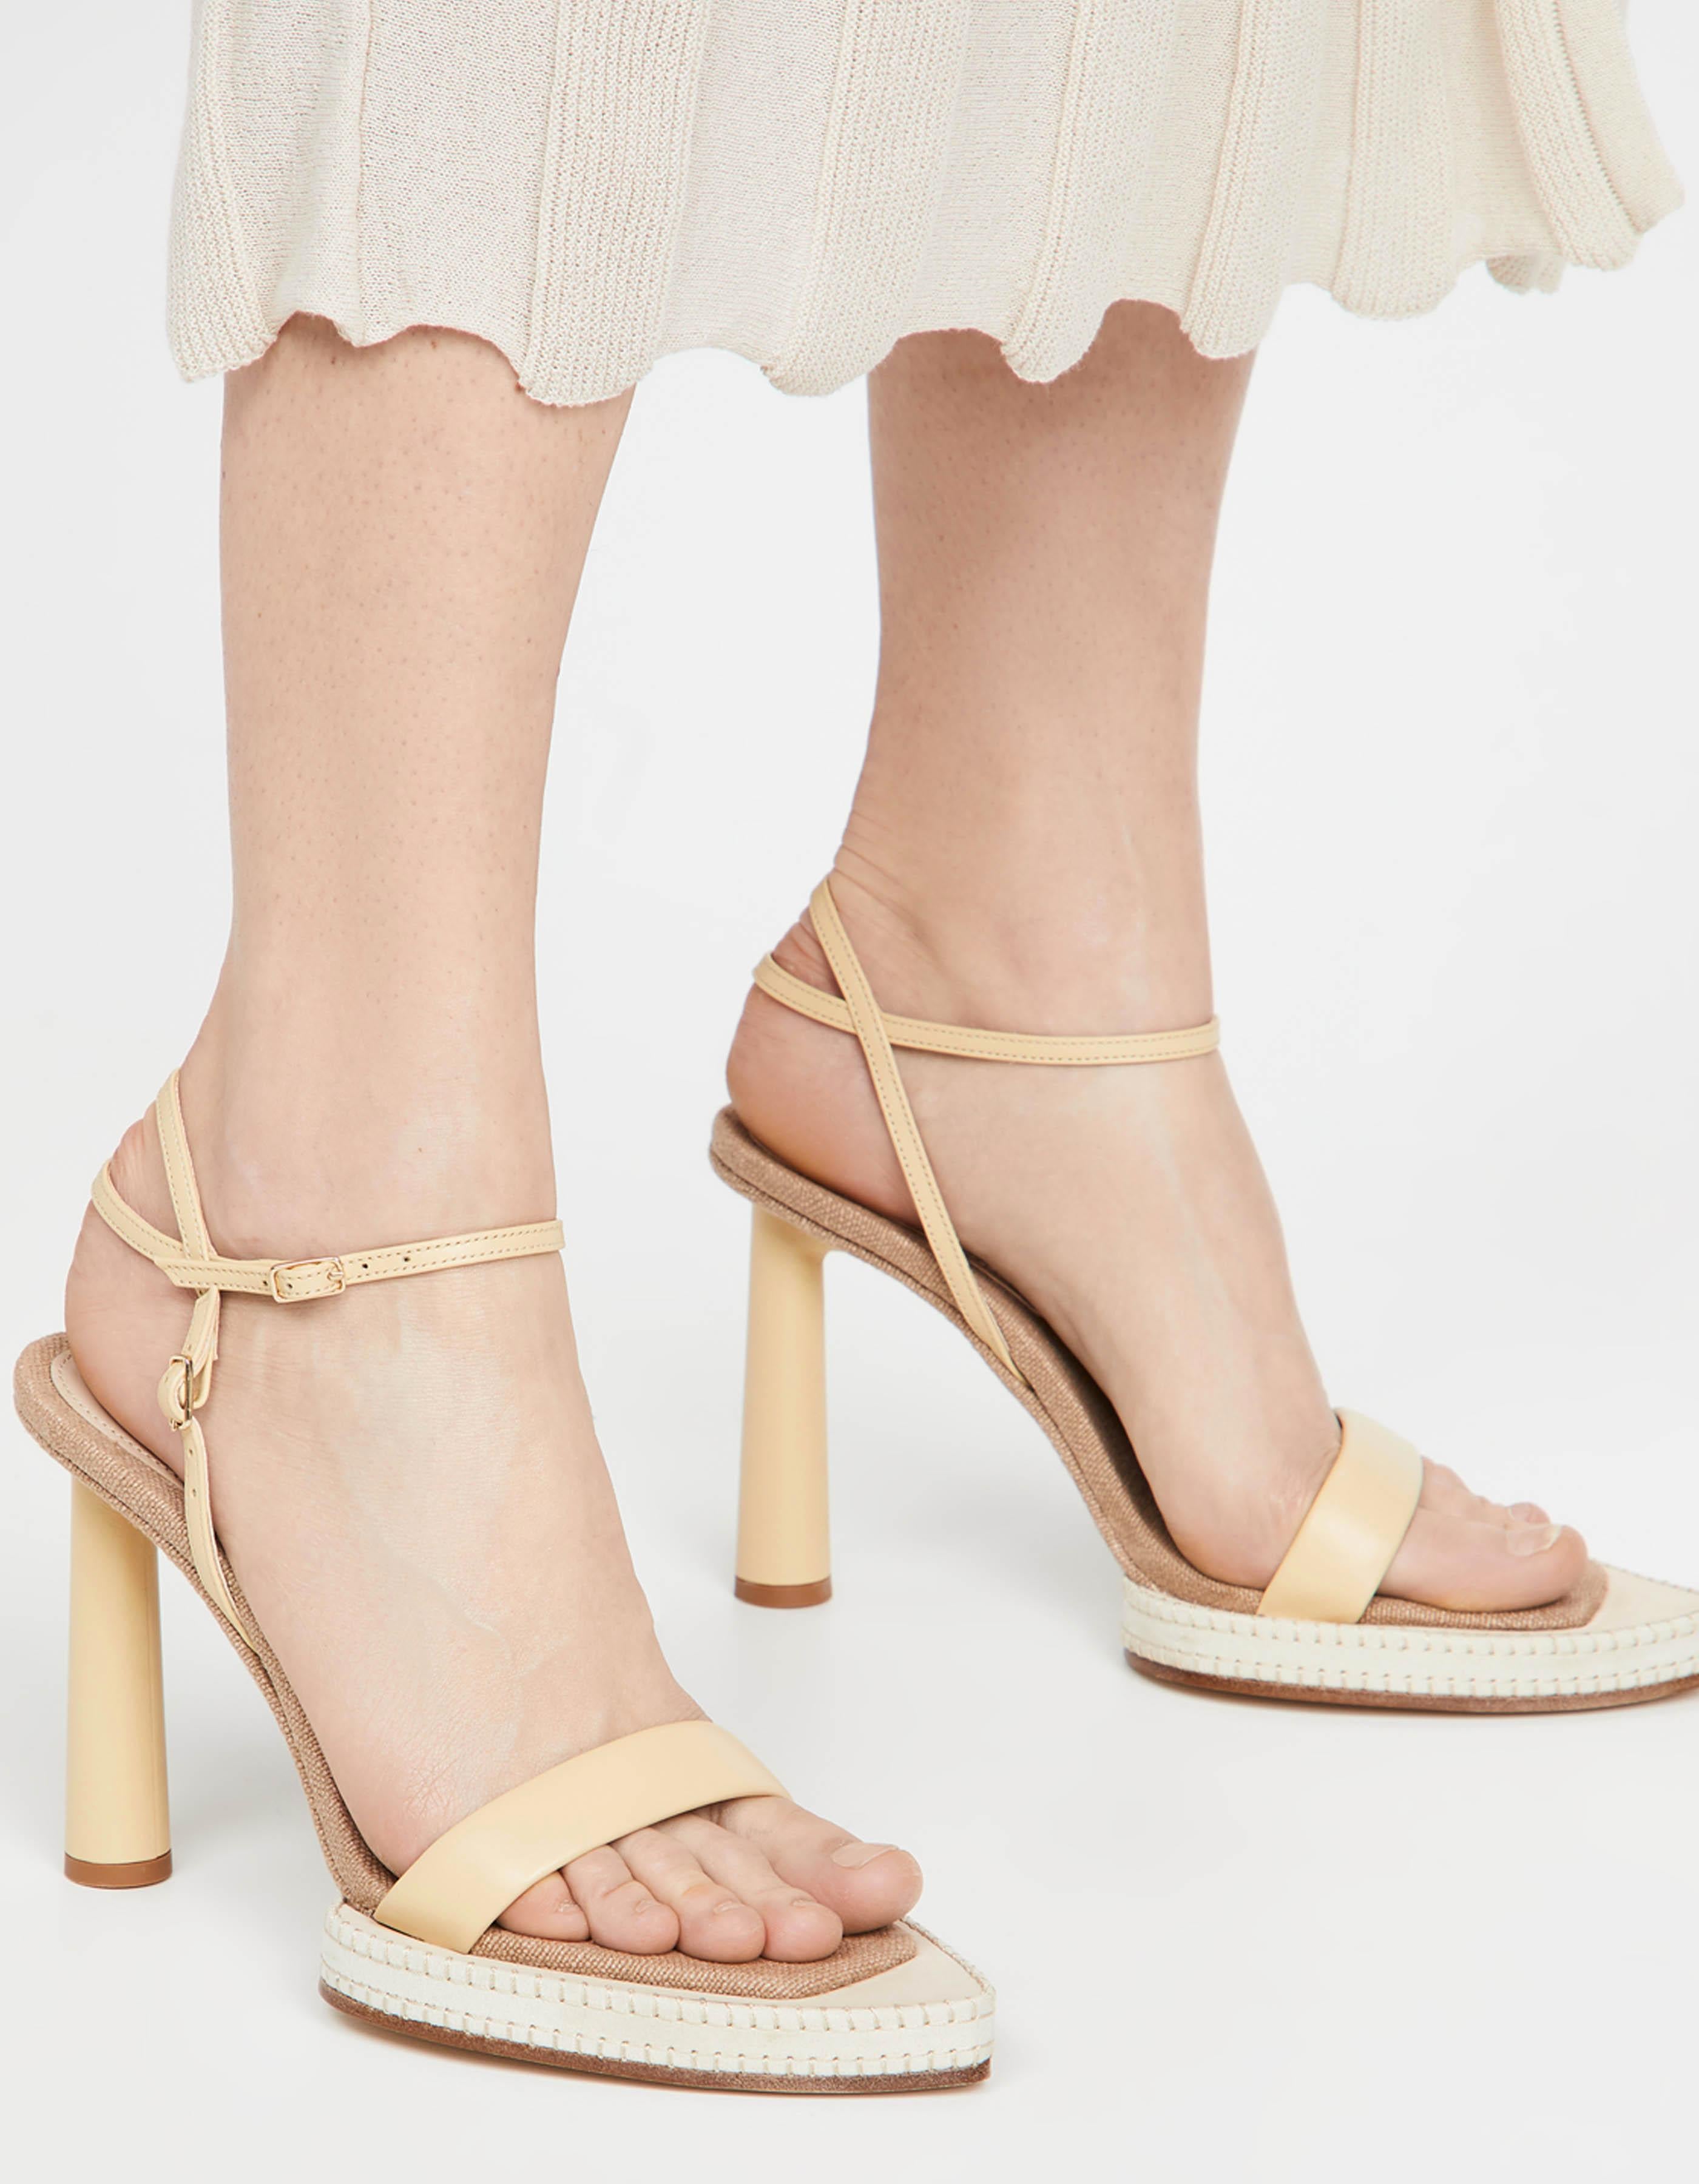 Jacquemus Beige Les Novio 95 Sandals sz 36

Made In: Portugal
Color: Beige
Hardware: Pale goldtone
Materials: Leather, canvas
Closure/Opening: Two adjustable buckle straps
Overall Condition: New- resoled
Estimated Retail: $700 plus tax

Marked Size: